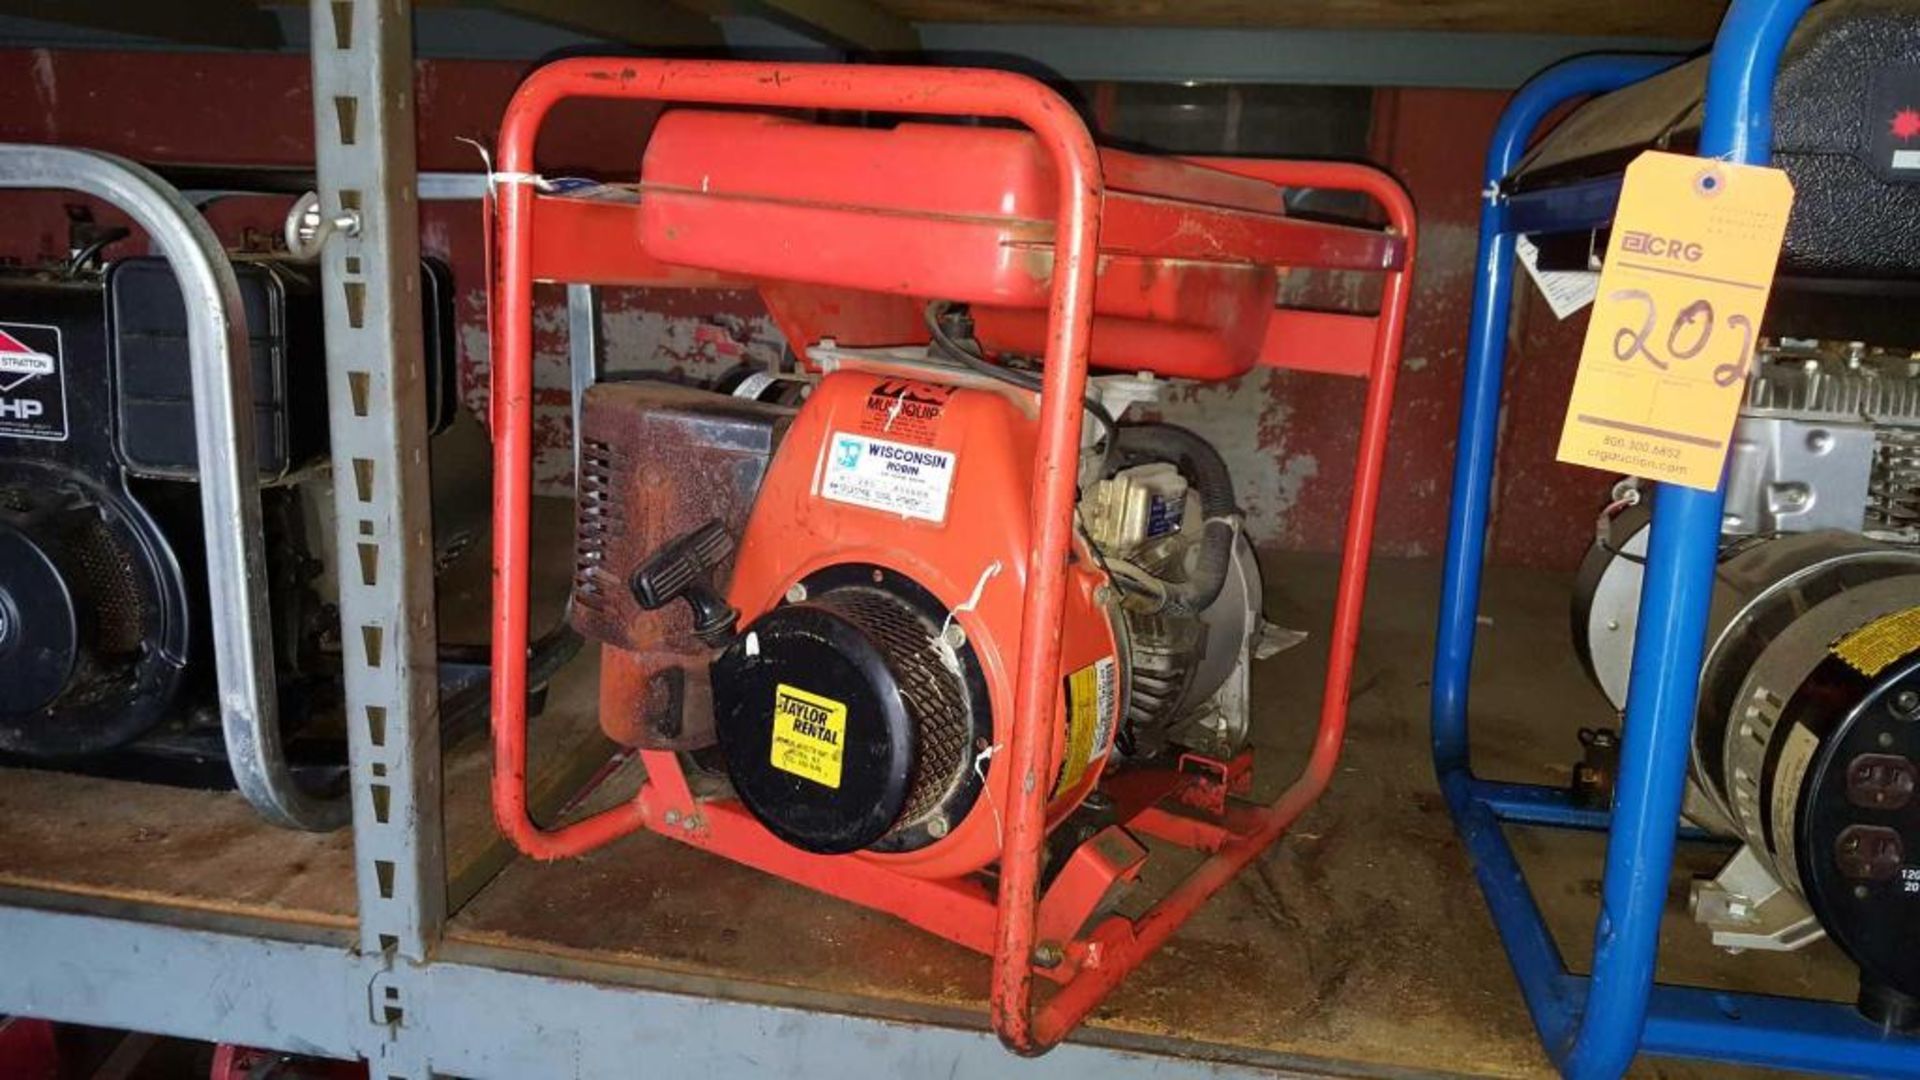 Multiquip 3600 gas generator, model GA-3.6RZ, with Wisconsin Robin WI-280, air cooled gas motor - Image 2 of 2